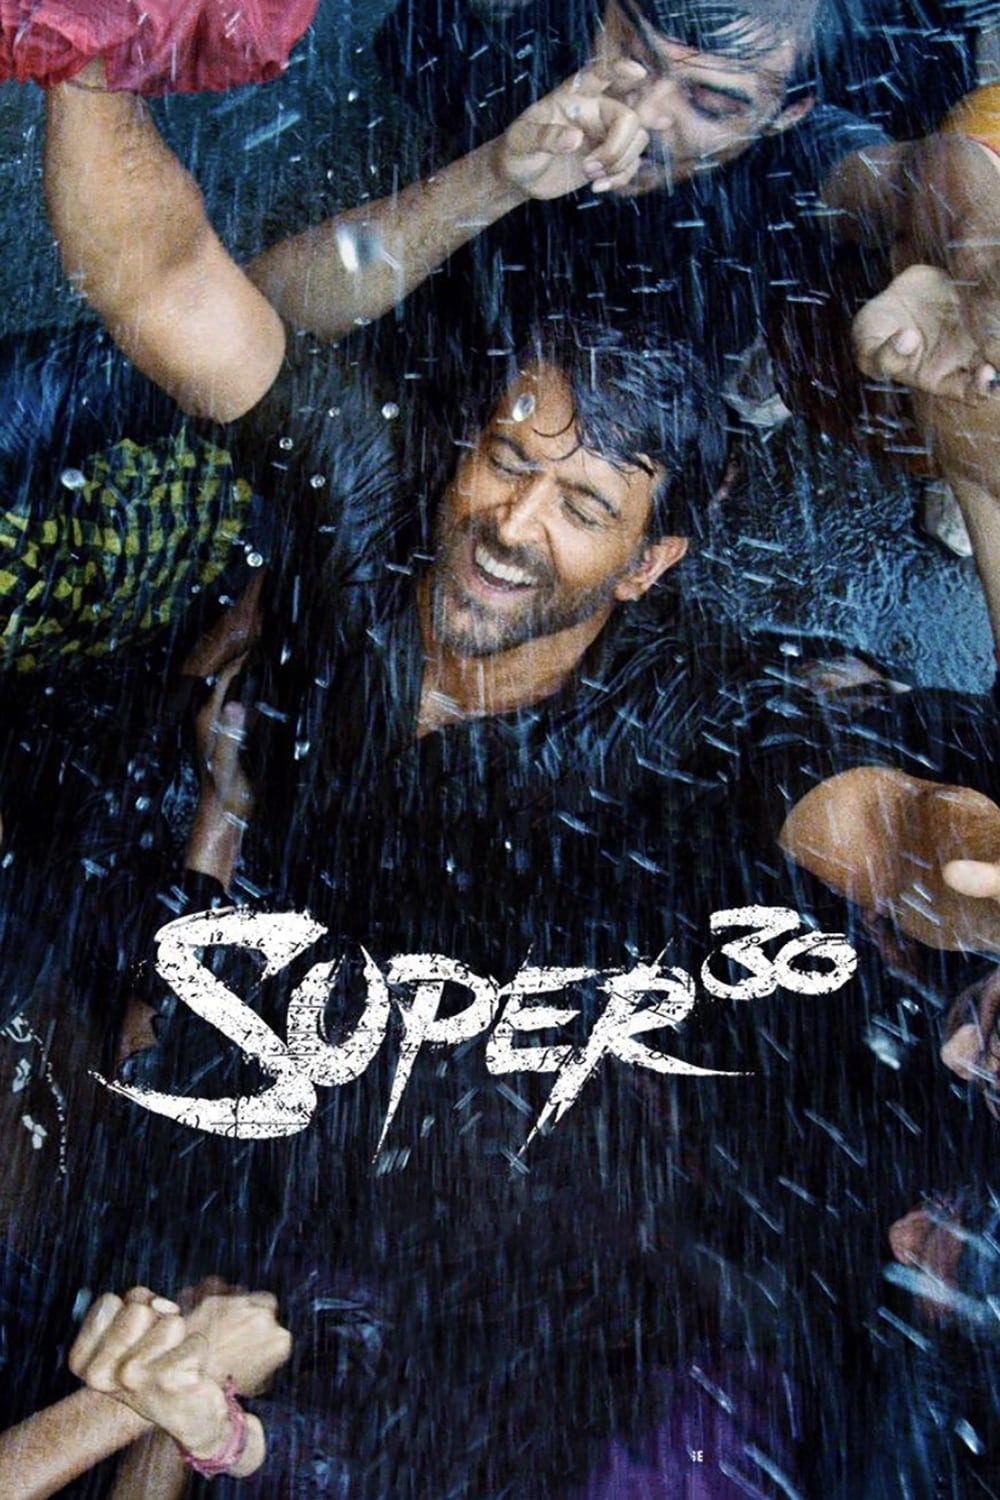 Poster for the movie "Super 30"